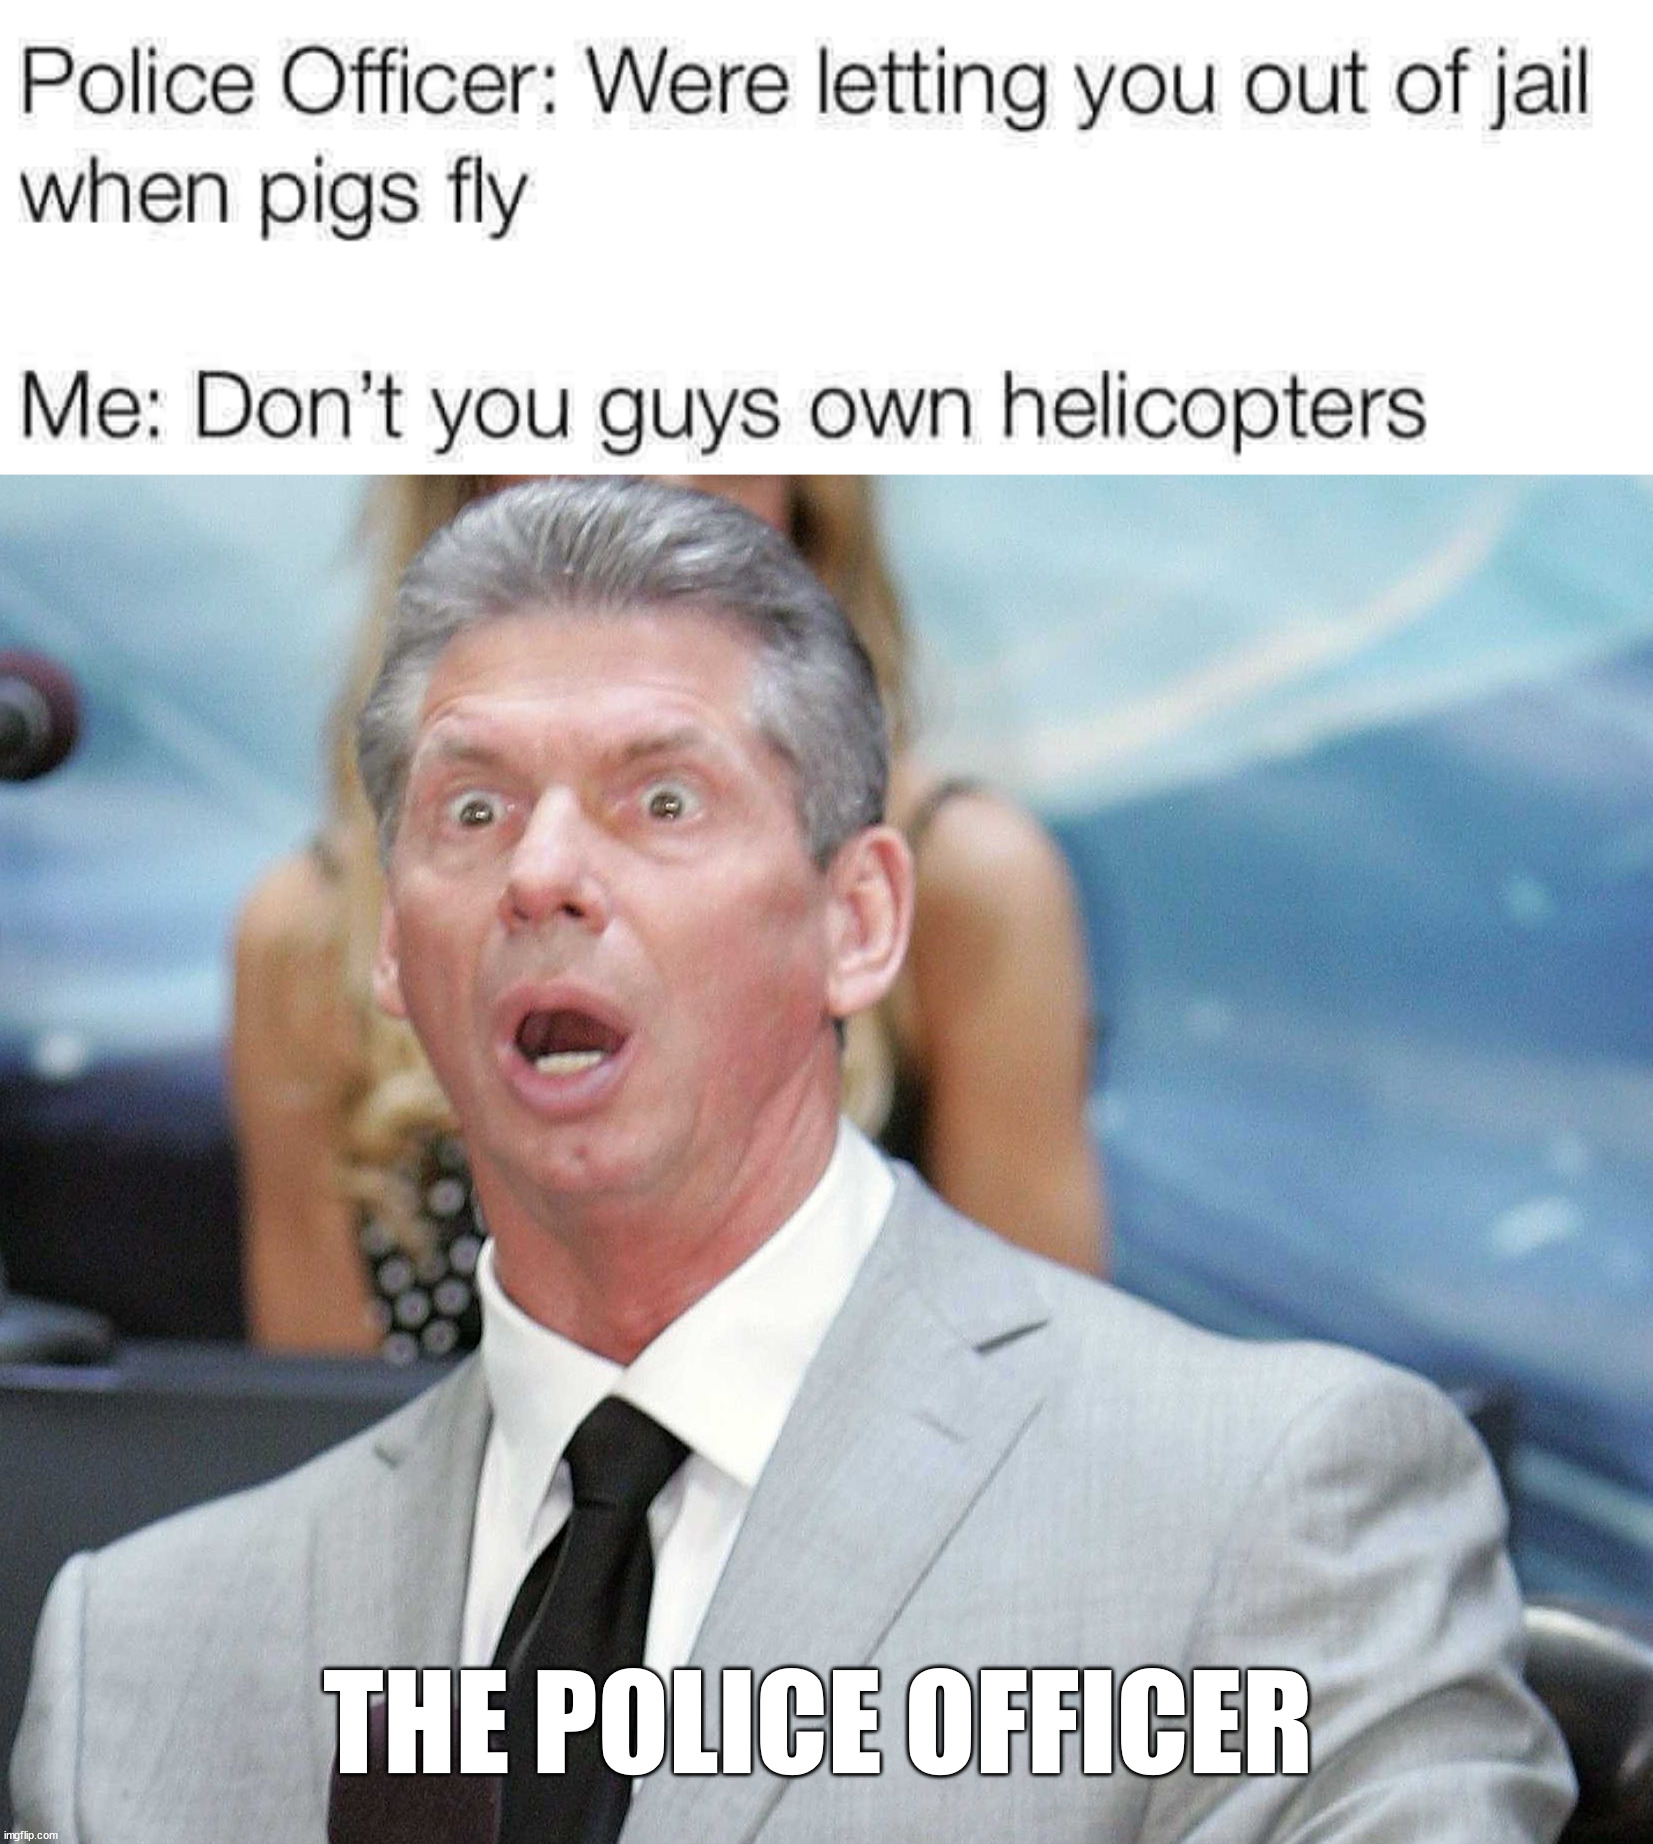 Got him there | THE POLICE OFFICER | image tagged in stunned,insult | made w/ Imgflip meme maker